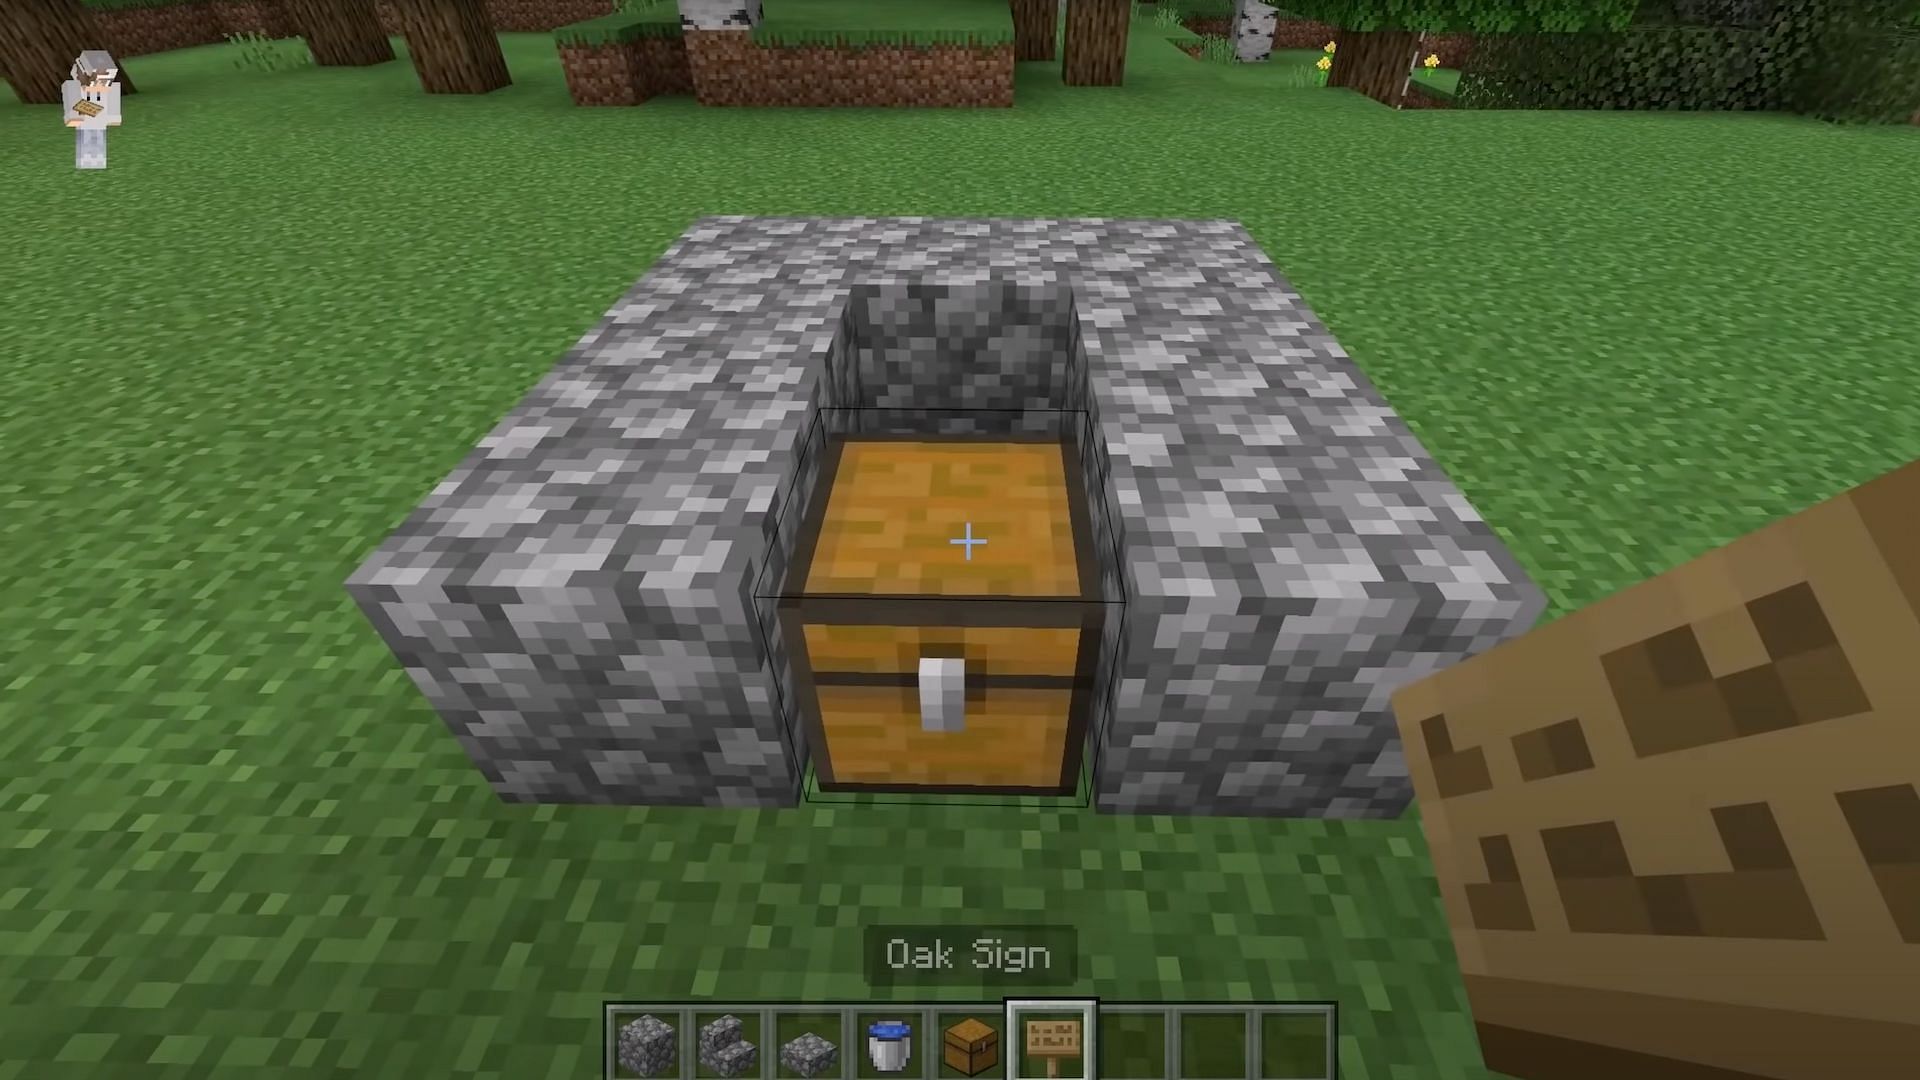 Players should place a chest down in between the two open blocks (Image via JC Playz/YouTube)